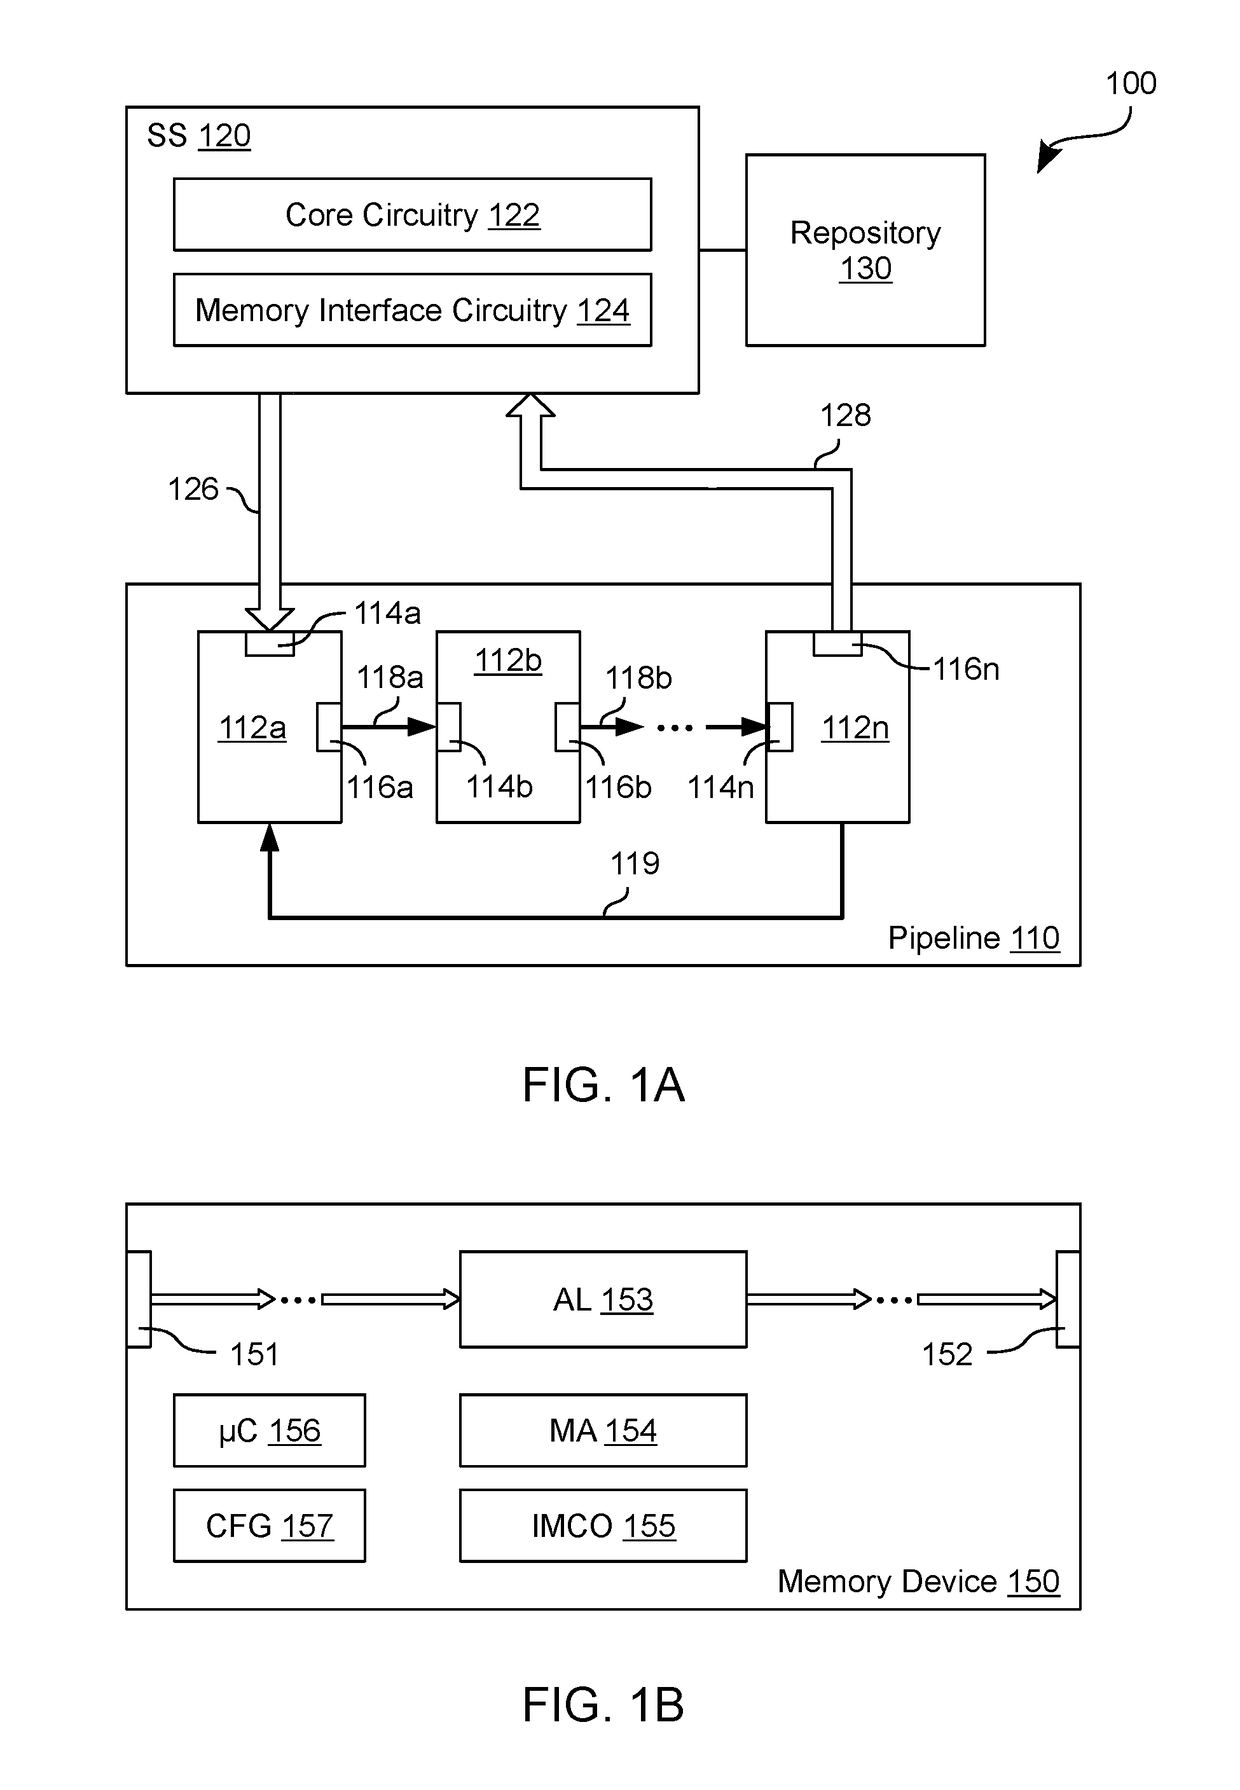 Pipeline circuit architecture to provide in-memory computation functionality